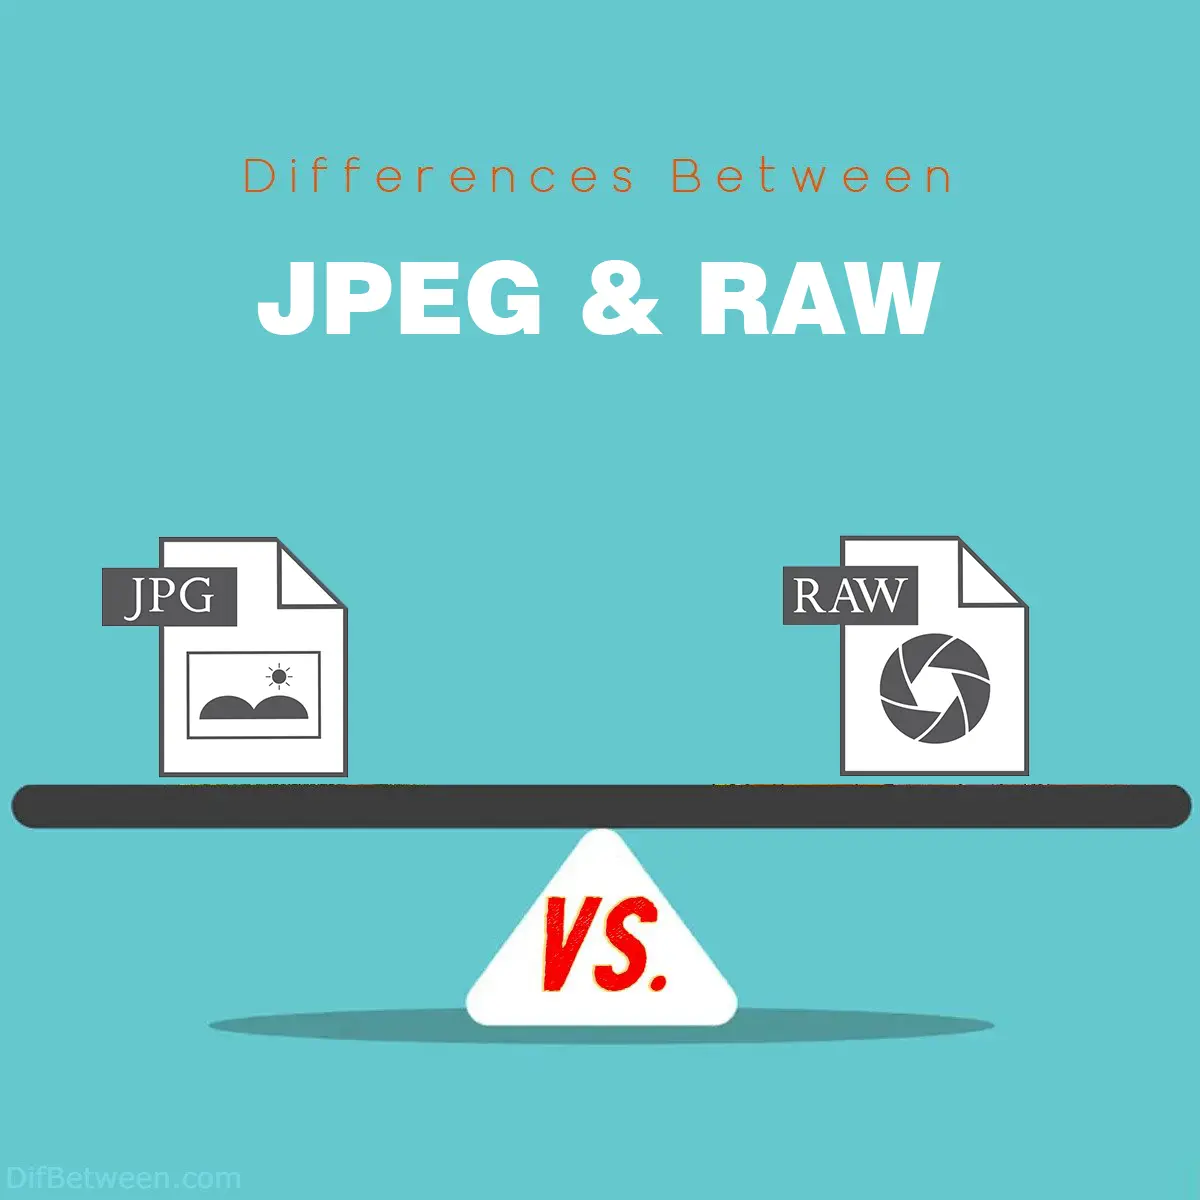 Differences Between JPEG and RAW